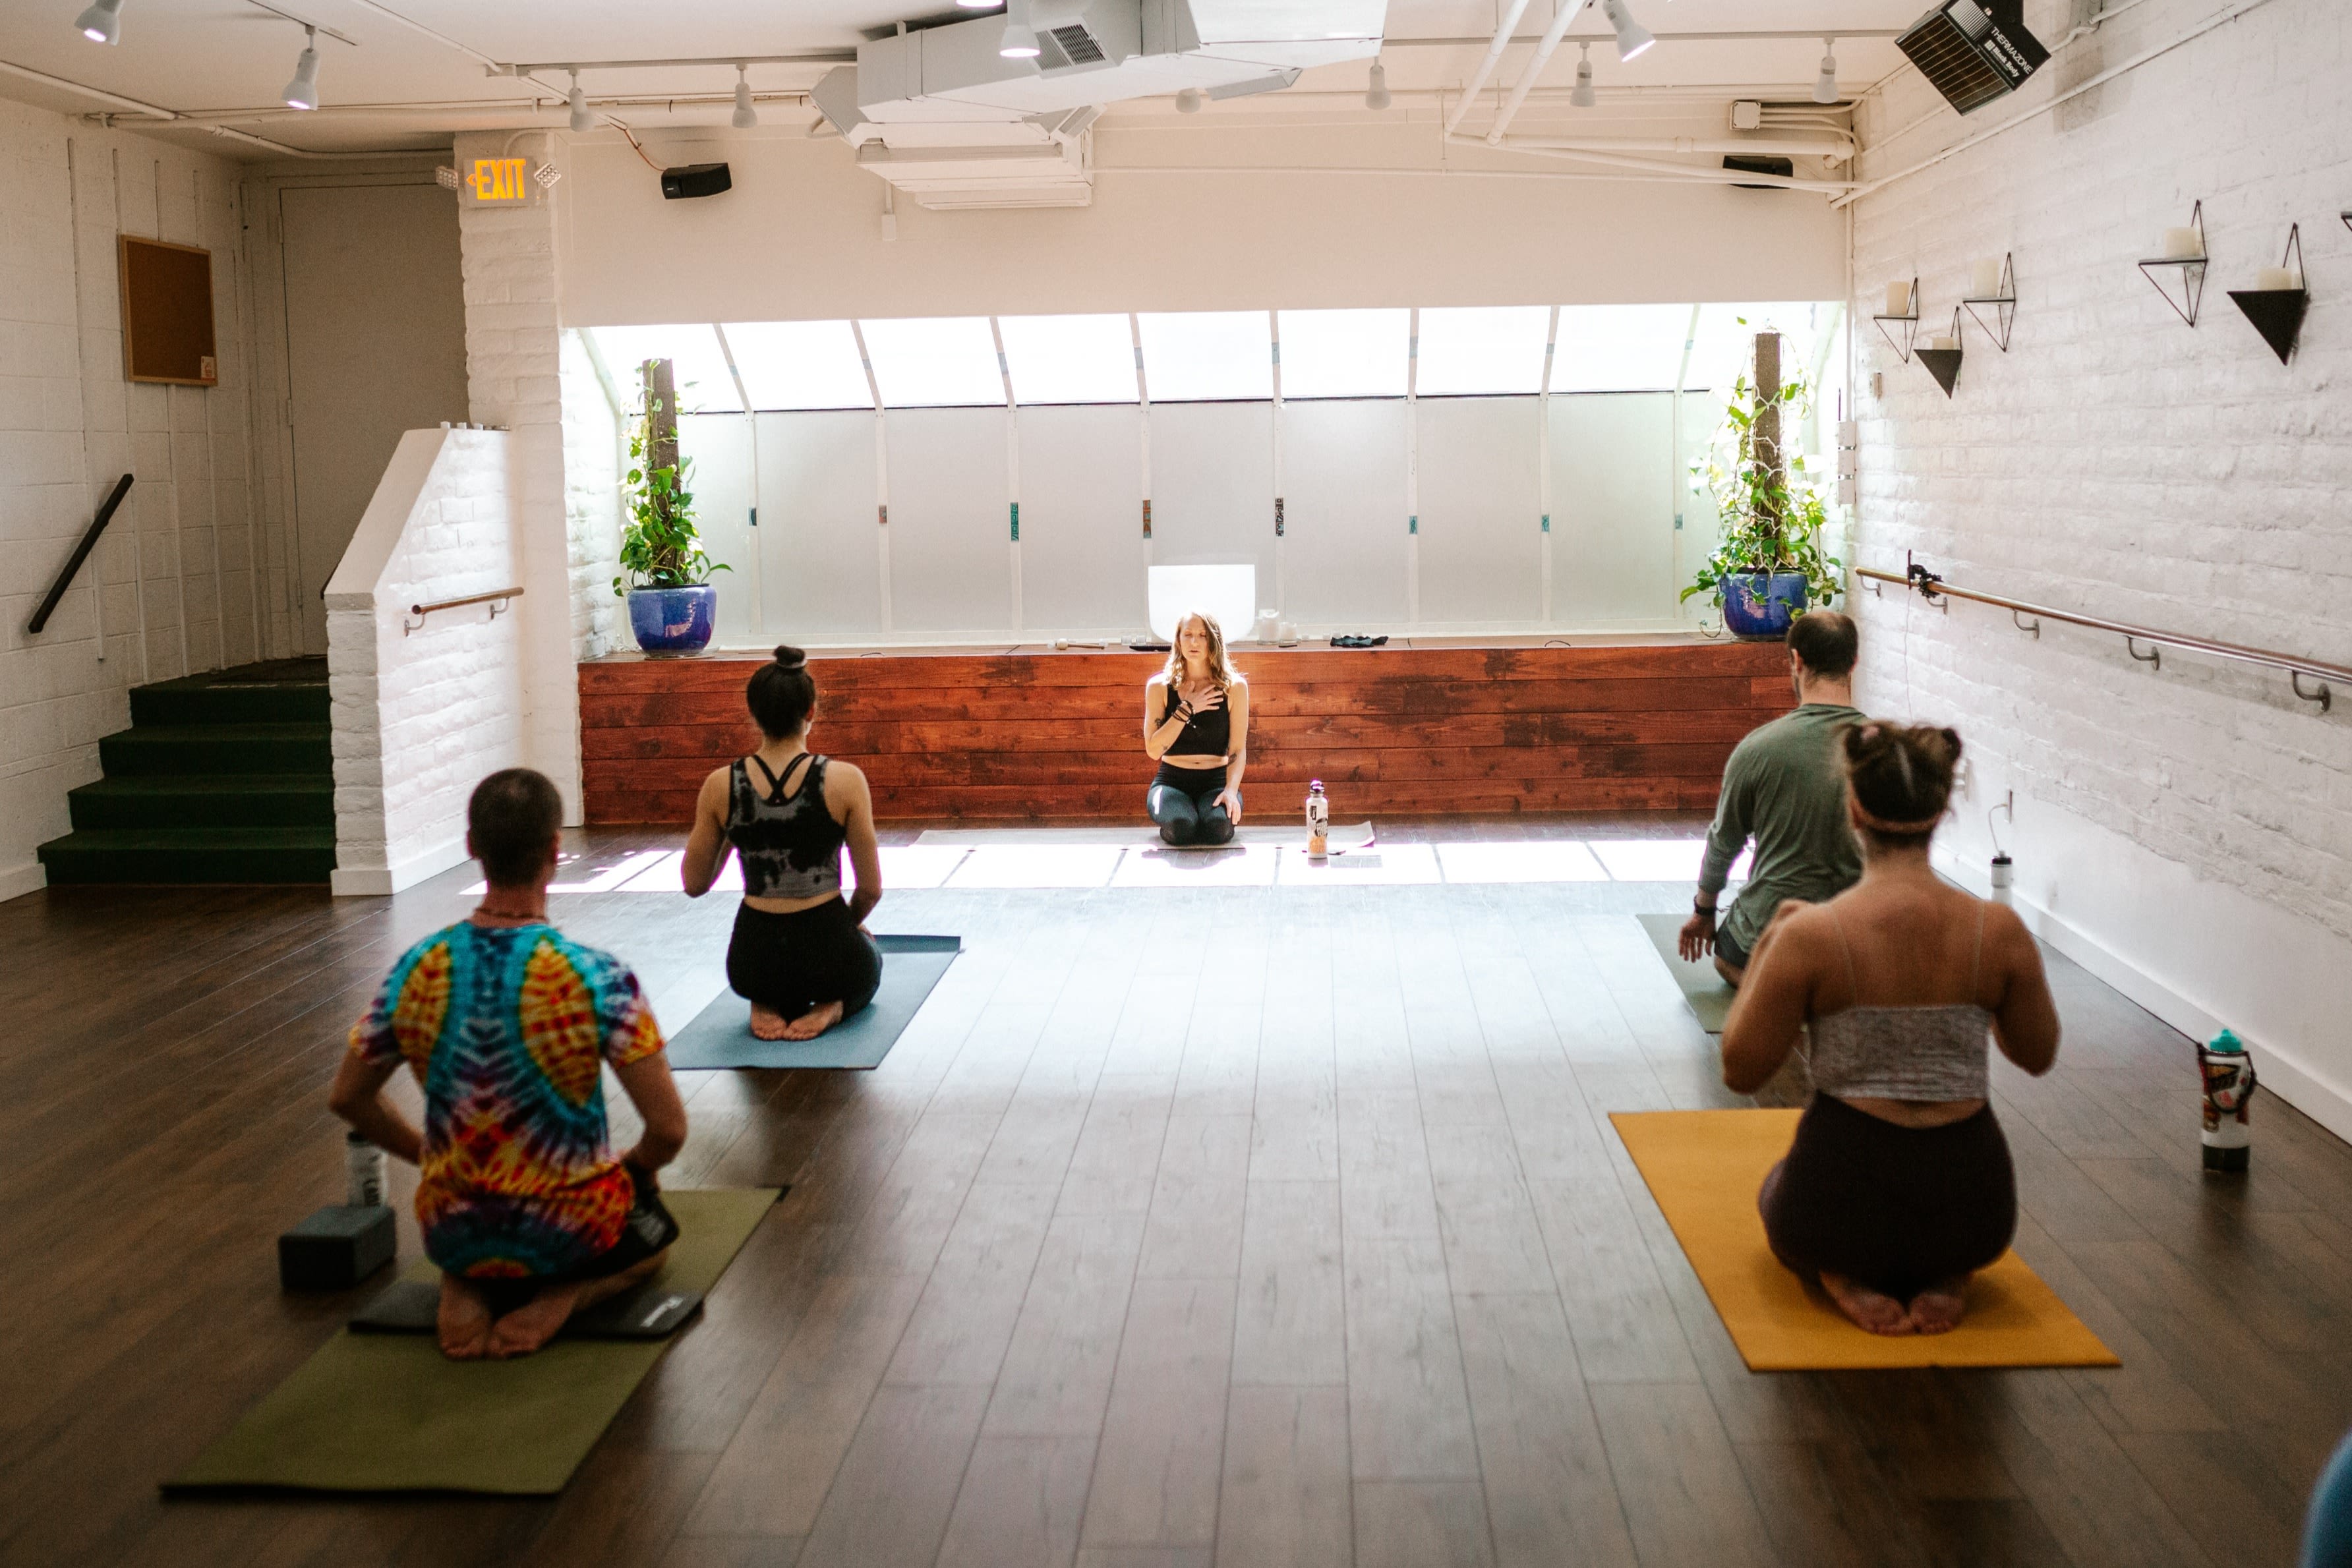 Arizona Yoga Co.: Read Reviews and Book Classes on ClassPass